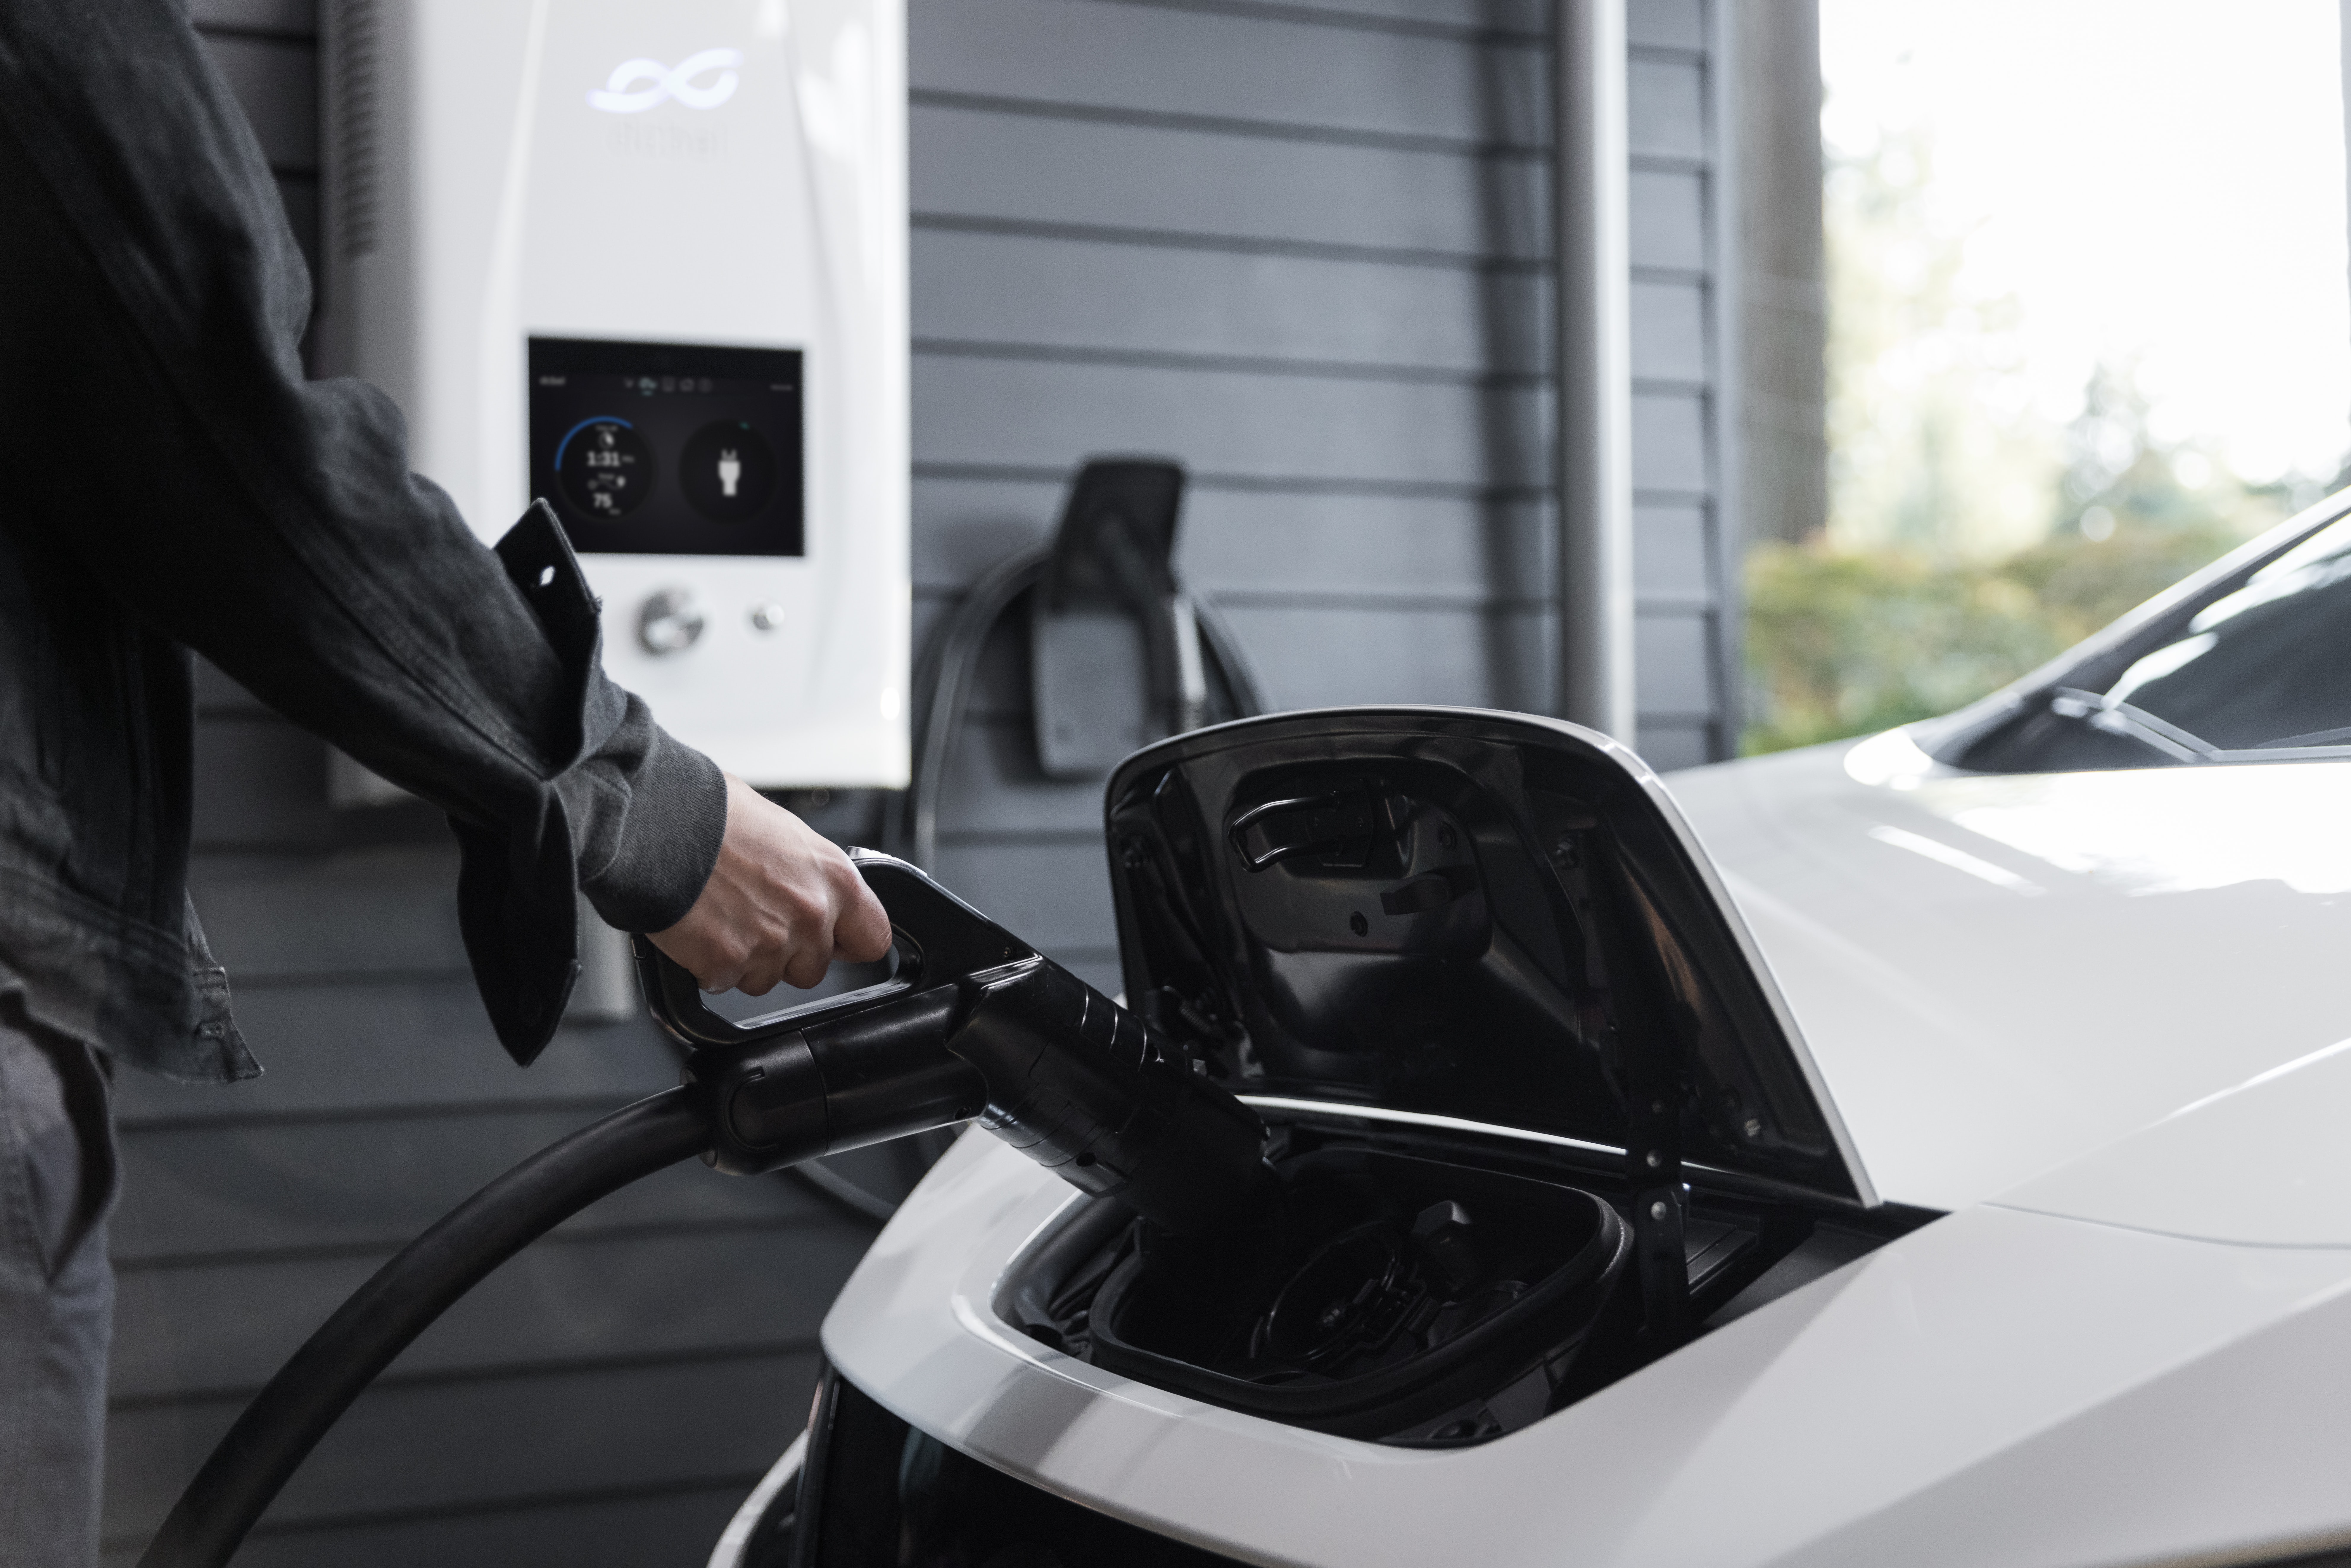 Less than one percent of Europe's cars are electric